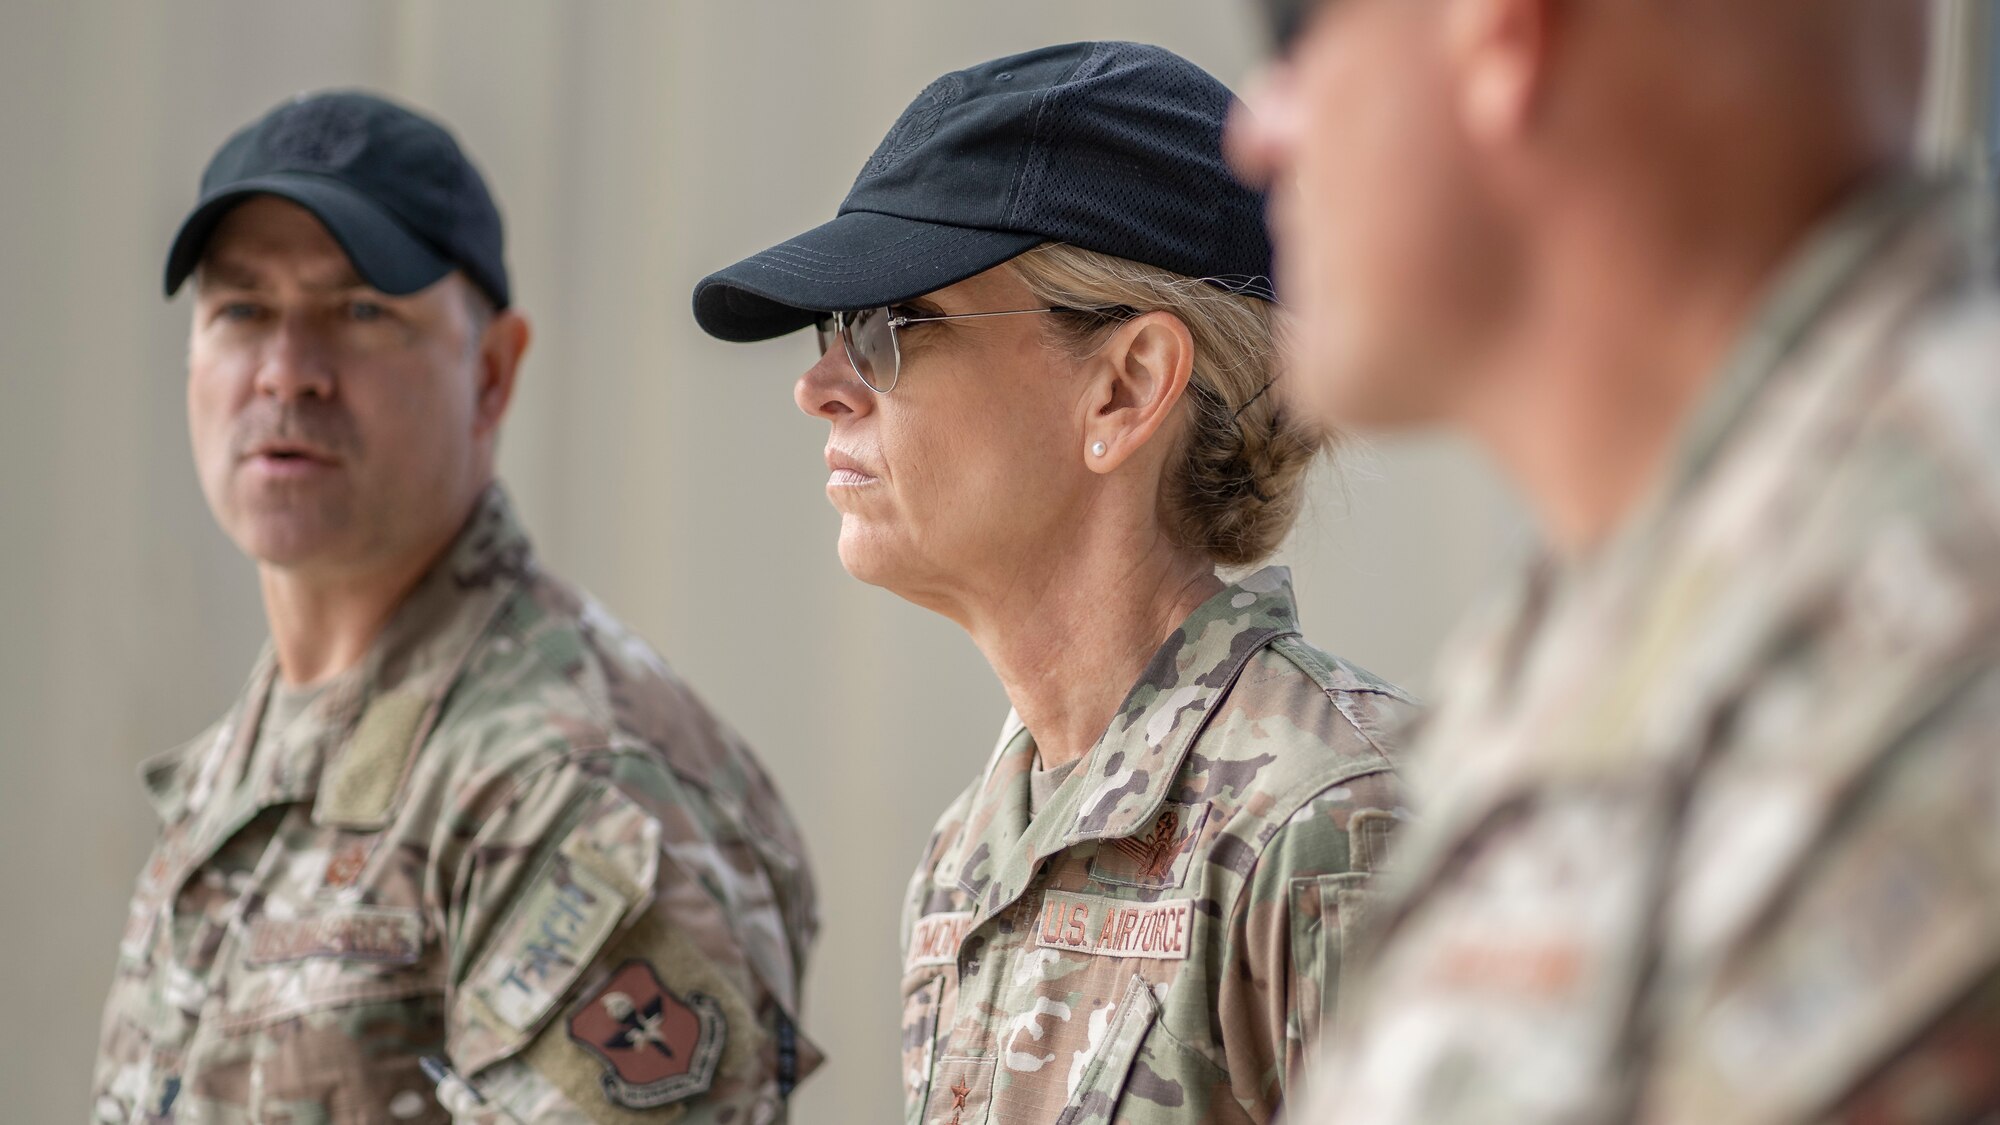 U.S. Air Force Maj. Gen. Michele Edmondson, Second Air Force commander and Lt. Col. Matthew McMurtry, 353rd Special Warfare Training Squadron commander, tour facilities and training grounds at Joint Base San Antonio-Camp Bullis, Nov. 2, 2021.